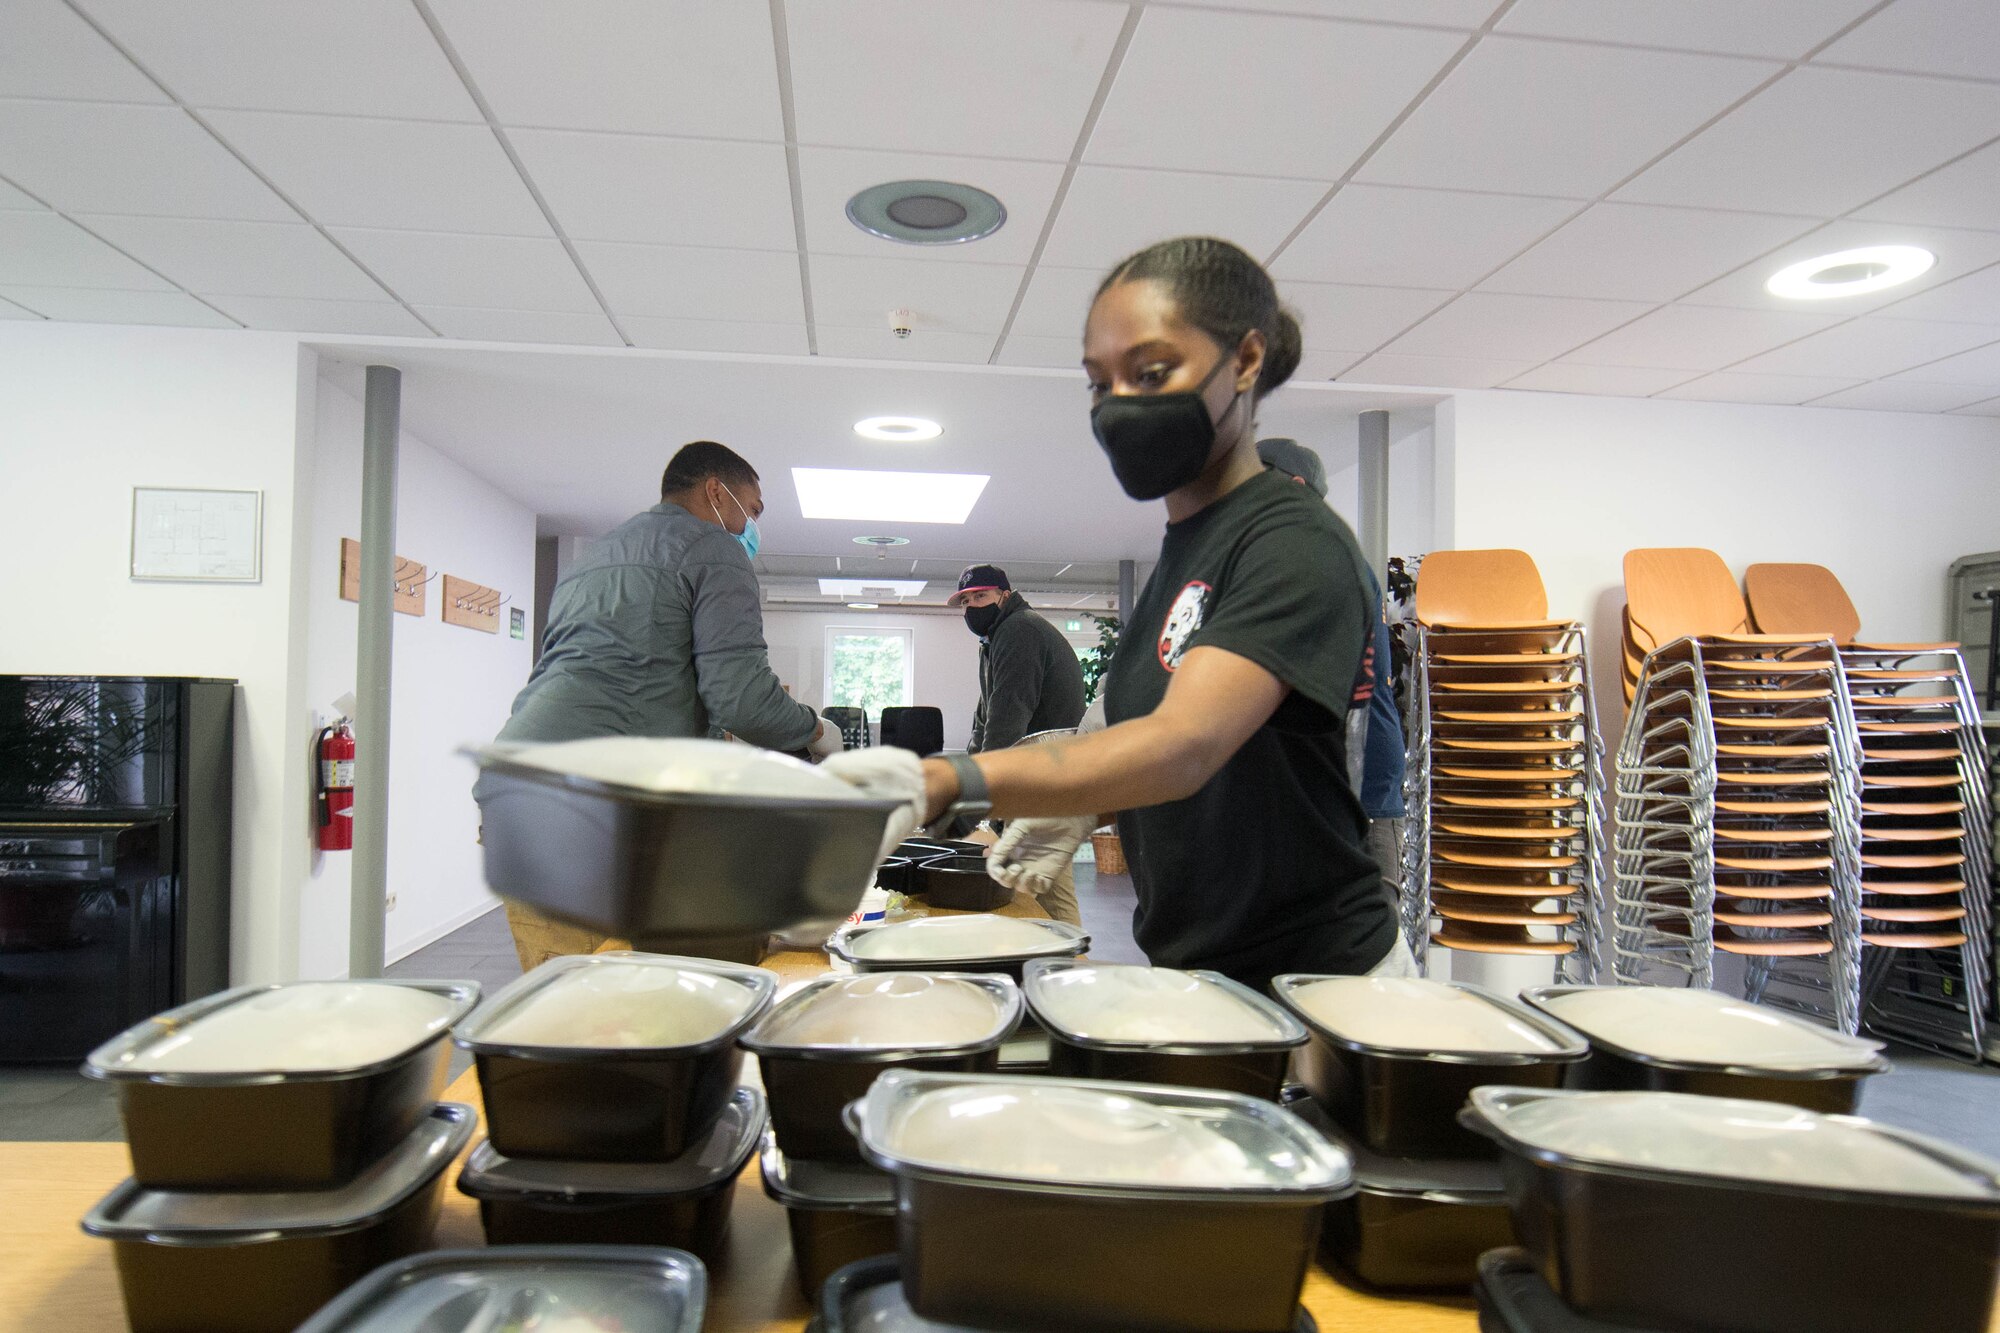 Photograph of a volunteer stacking meals that are ready for delivery.